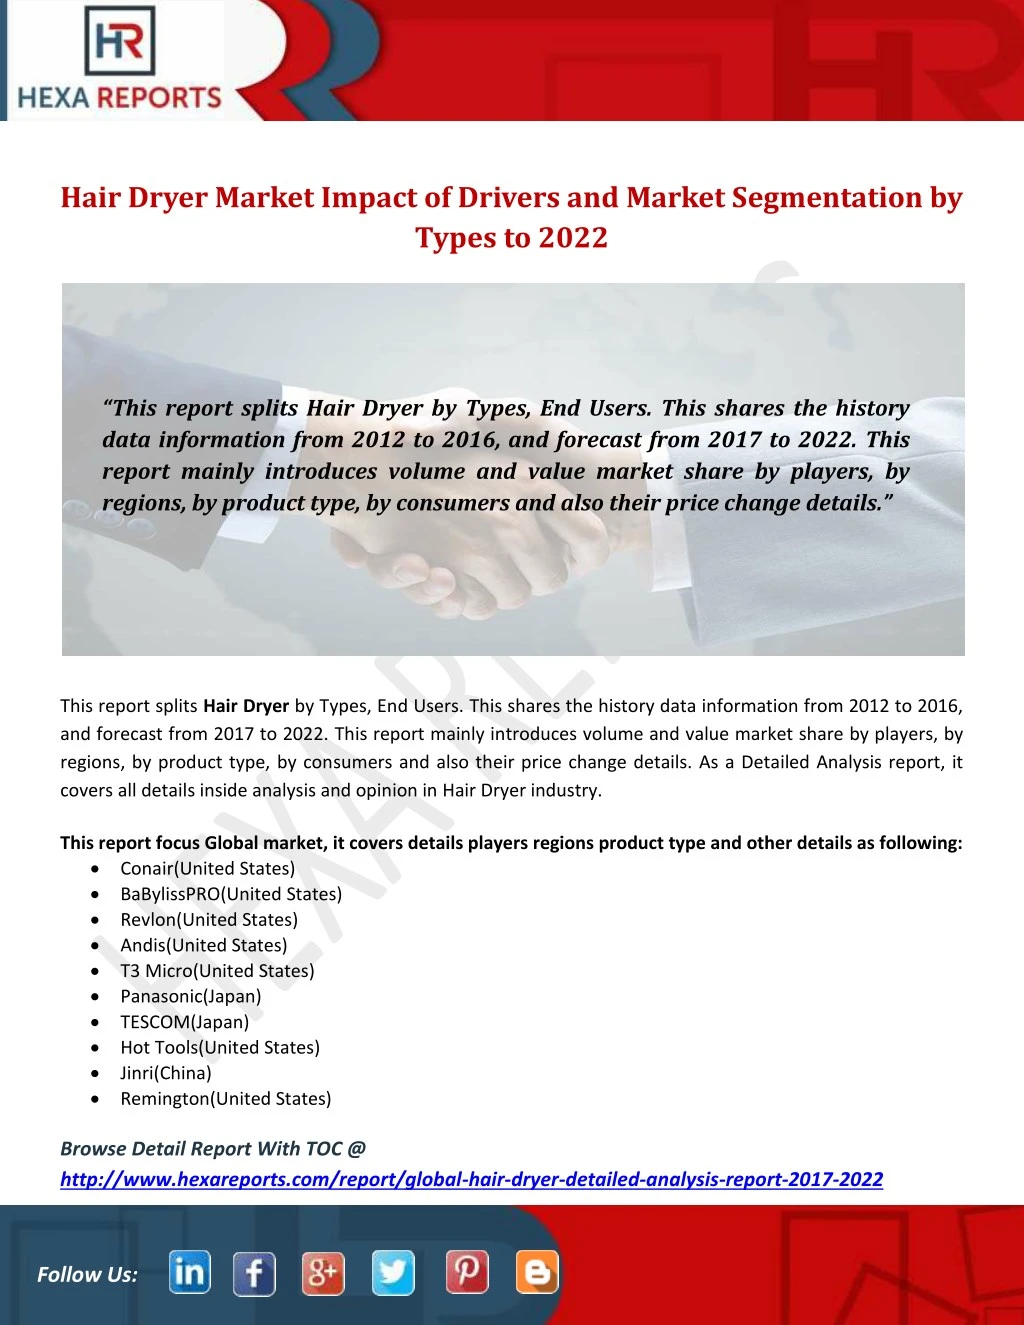 hair dryer market impact of drivers and market